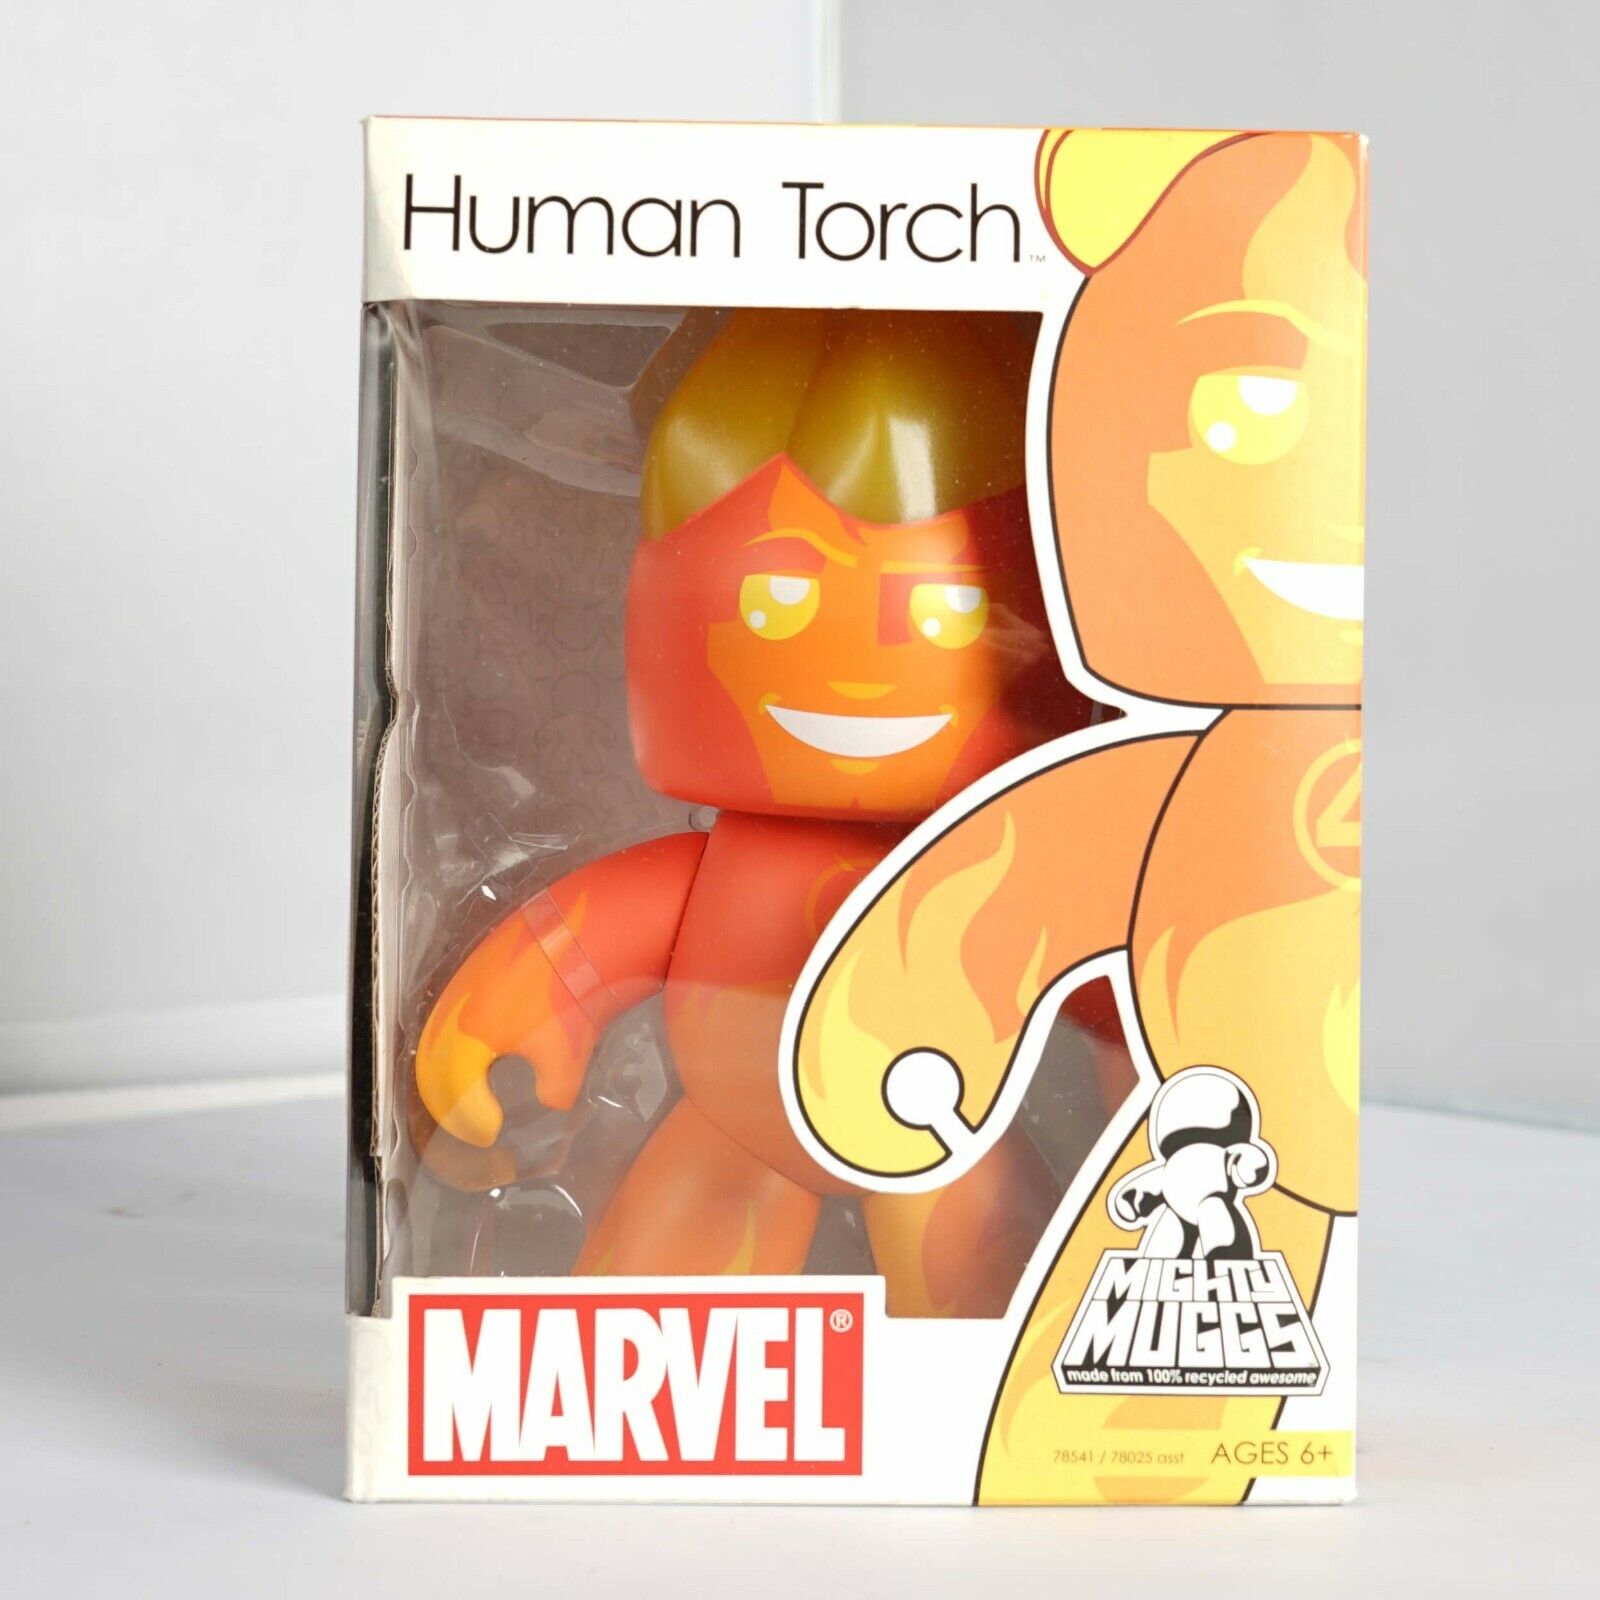 Marvel Mighty Muggs Human Torch Action Figure